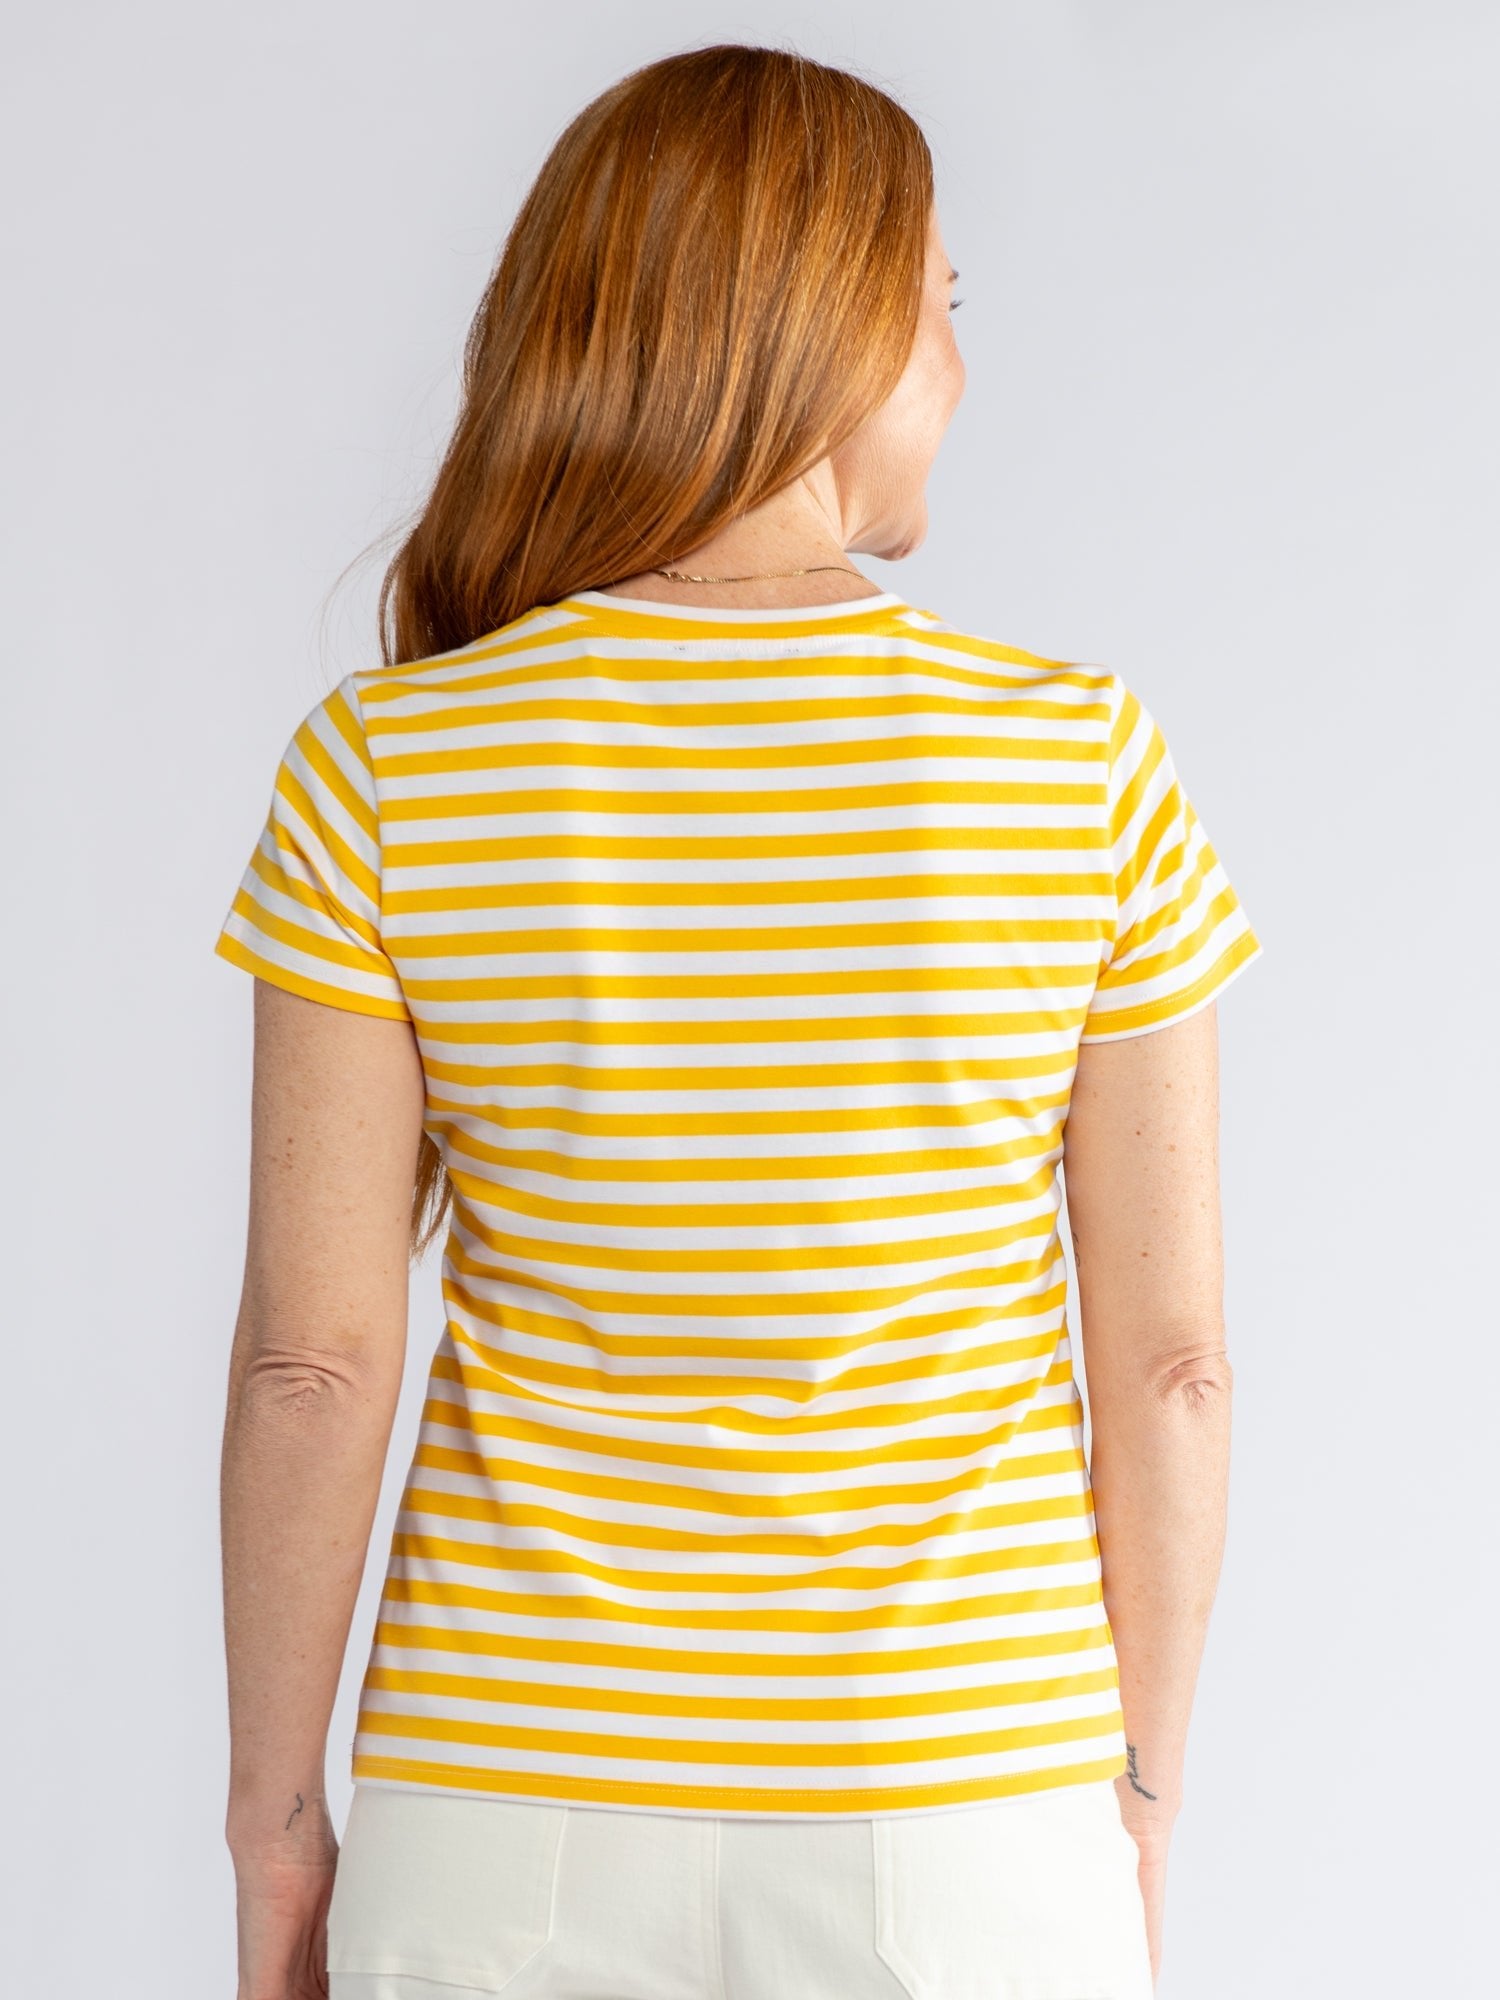 NELLIE tee Yellow and White Stripe - Lesley Evers-Shop-Shop/All Products-Shop/Dresses